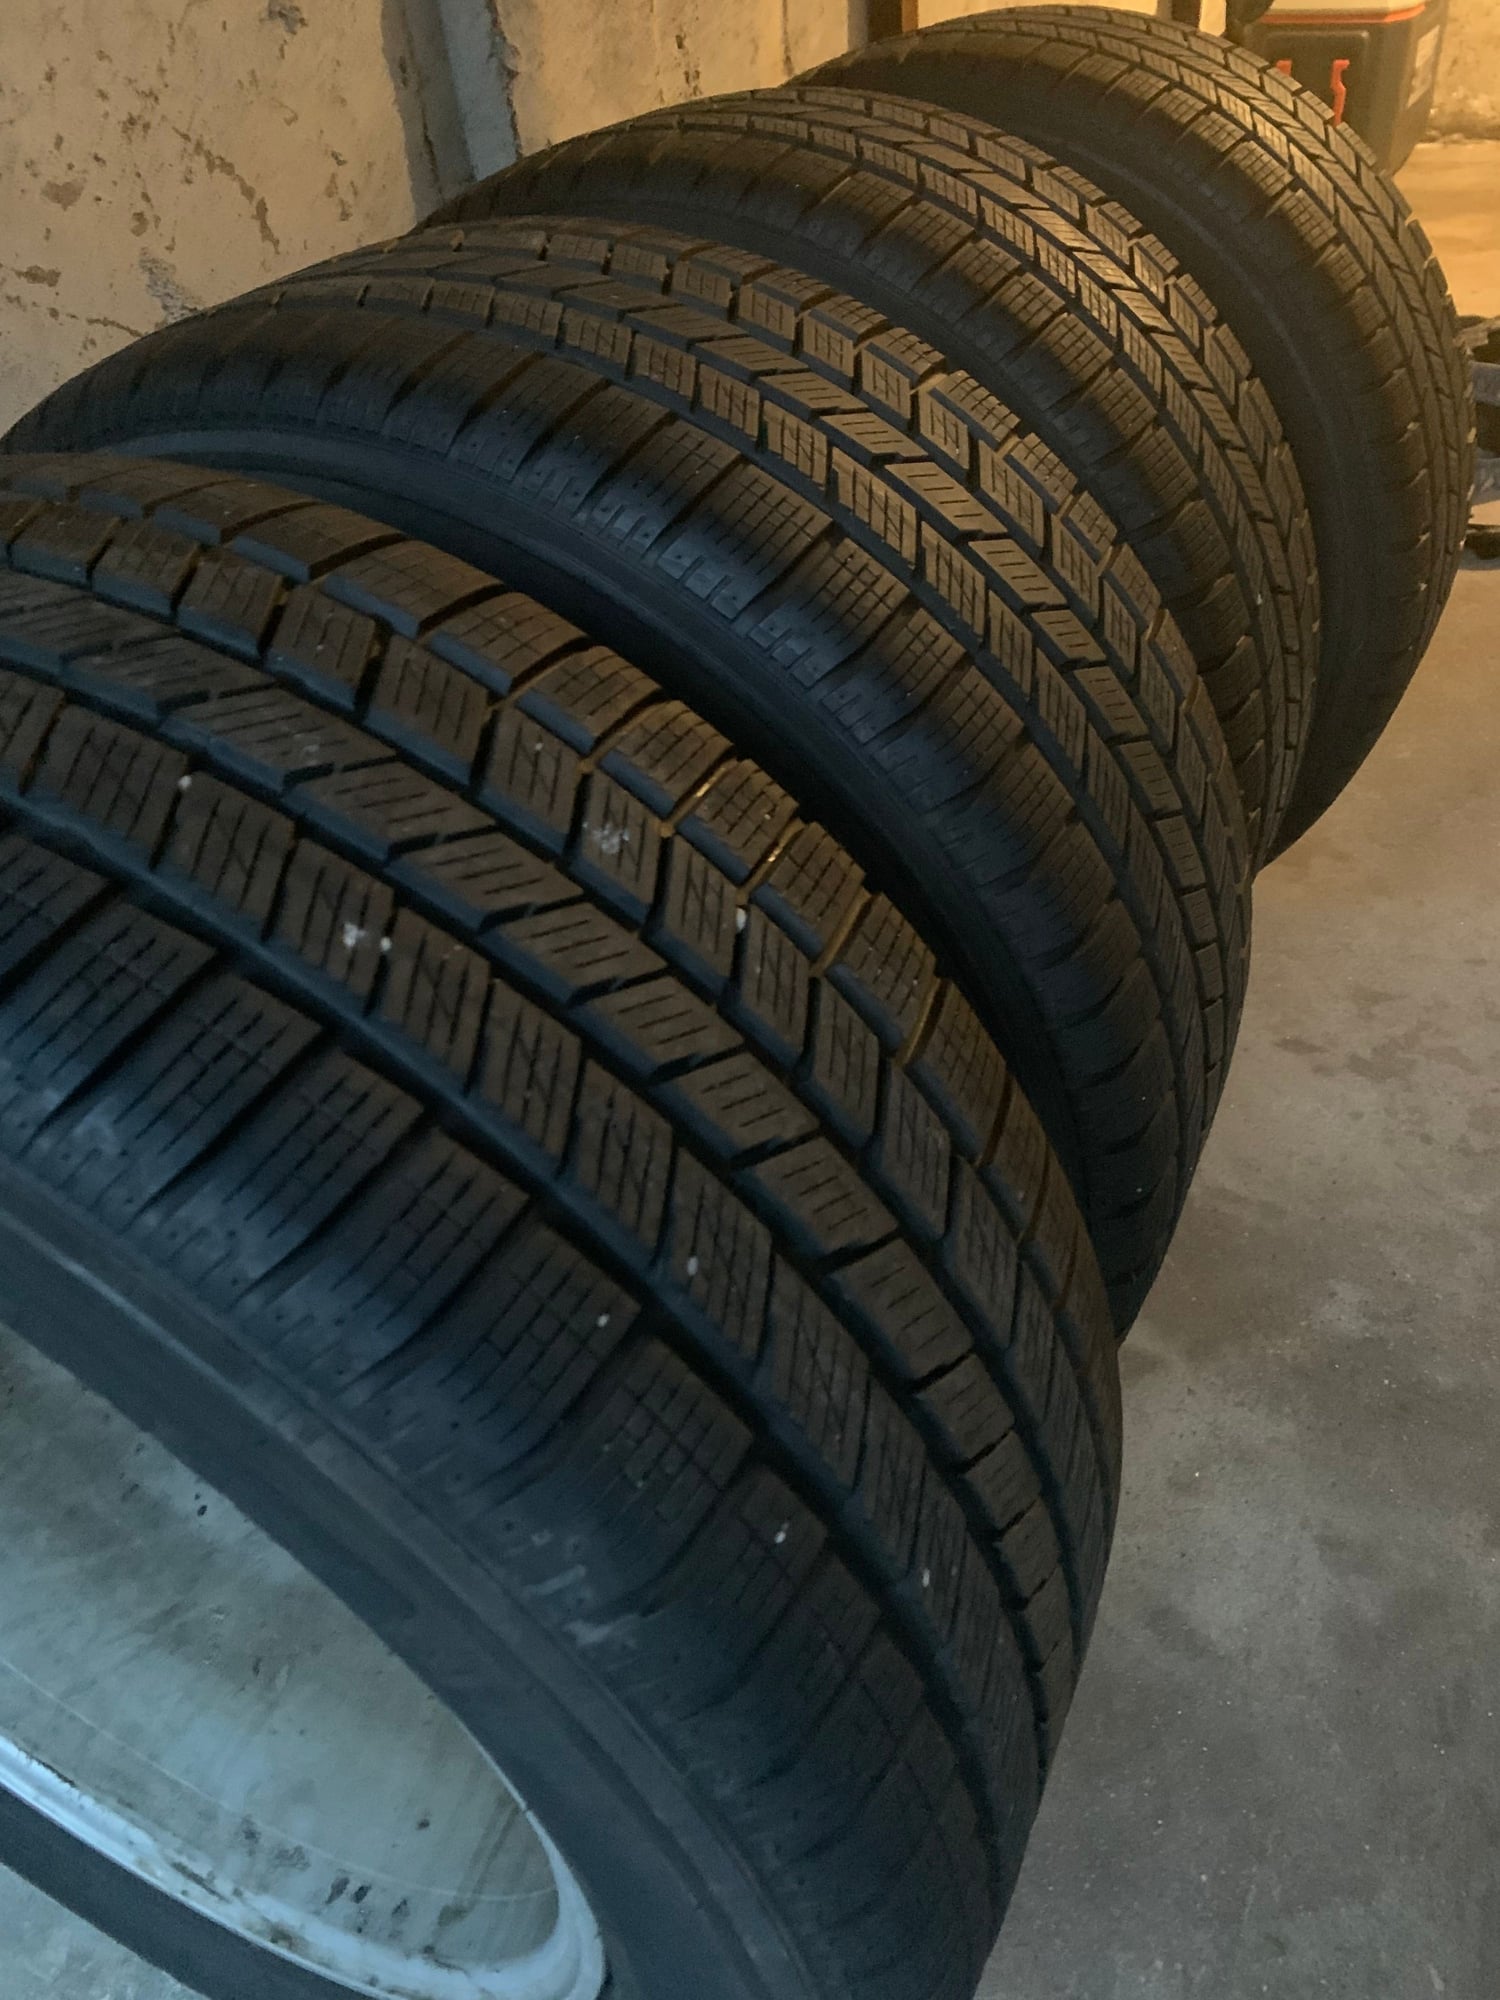 Wheels and Tires/Axles - 19" OEM Porsche Cayenne Design II Winter Wheels - Used - 0  All Models - Briarwood, NY 11435, United States